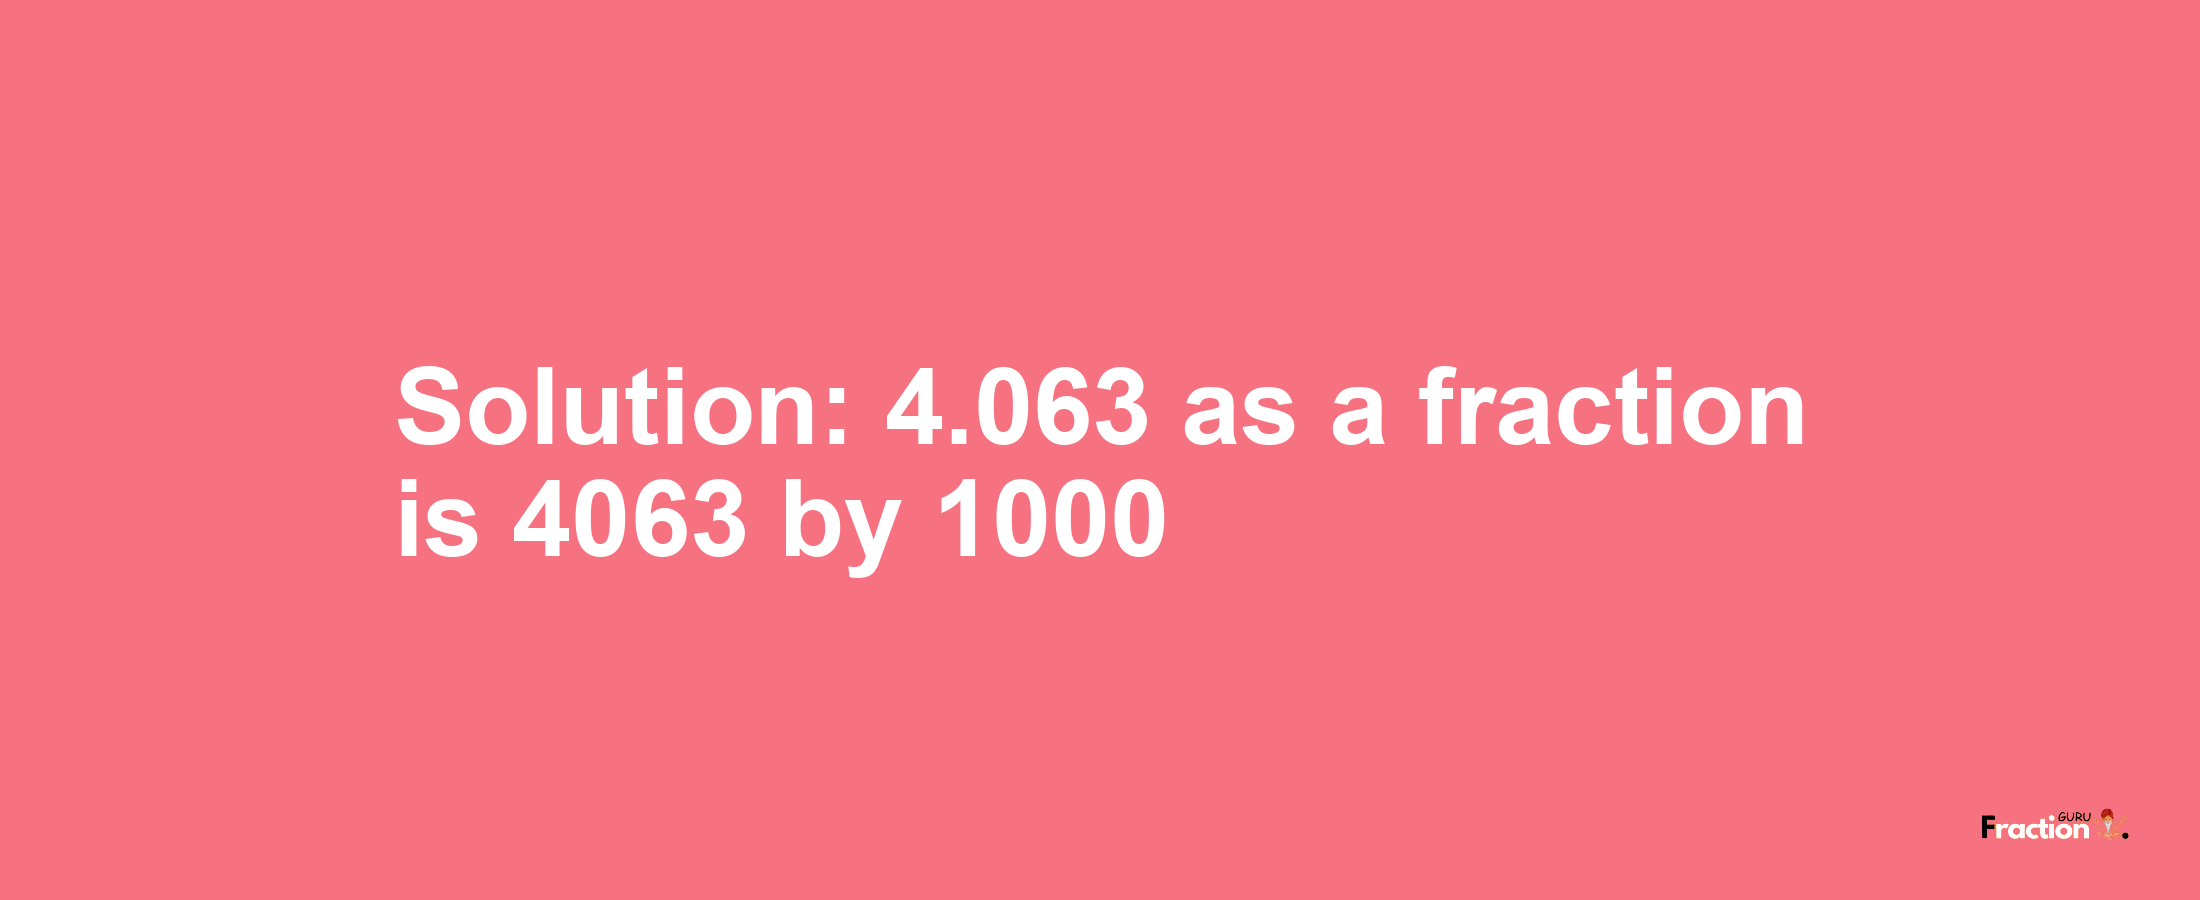 Solution:4.063 as a fraction is 4063/1000